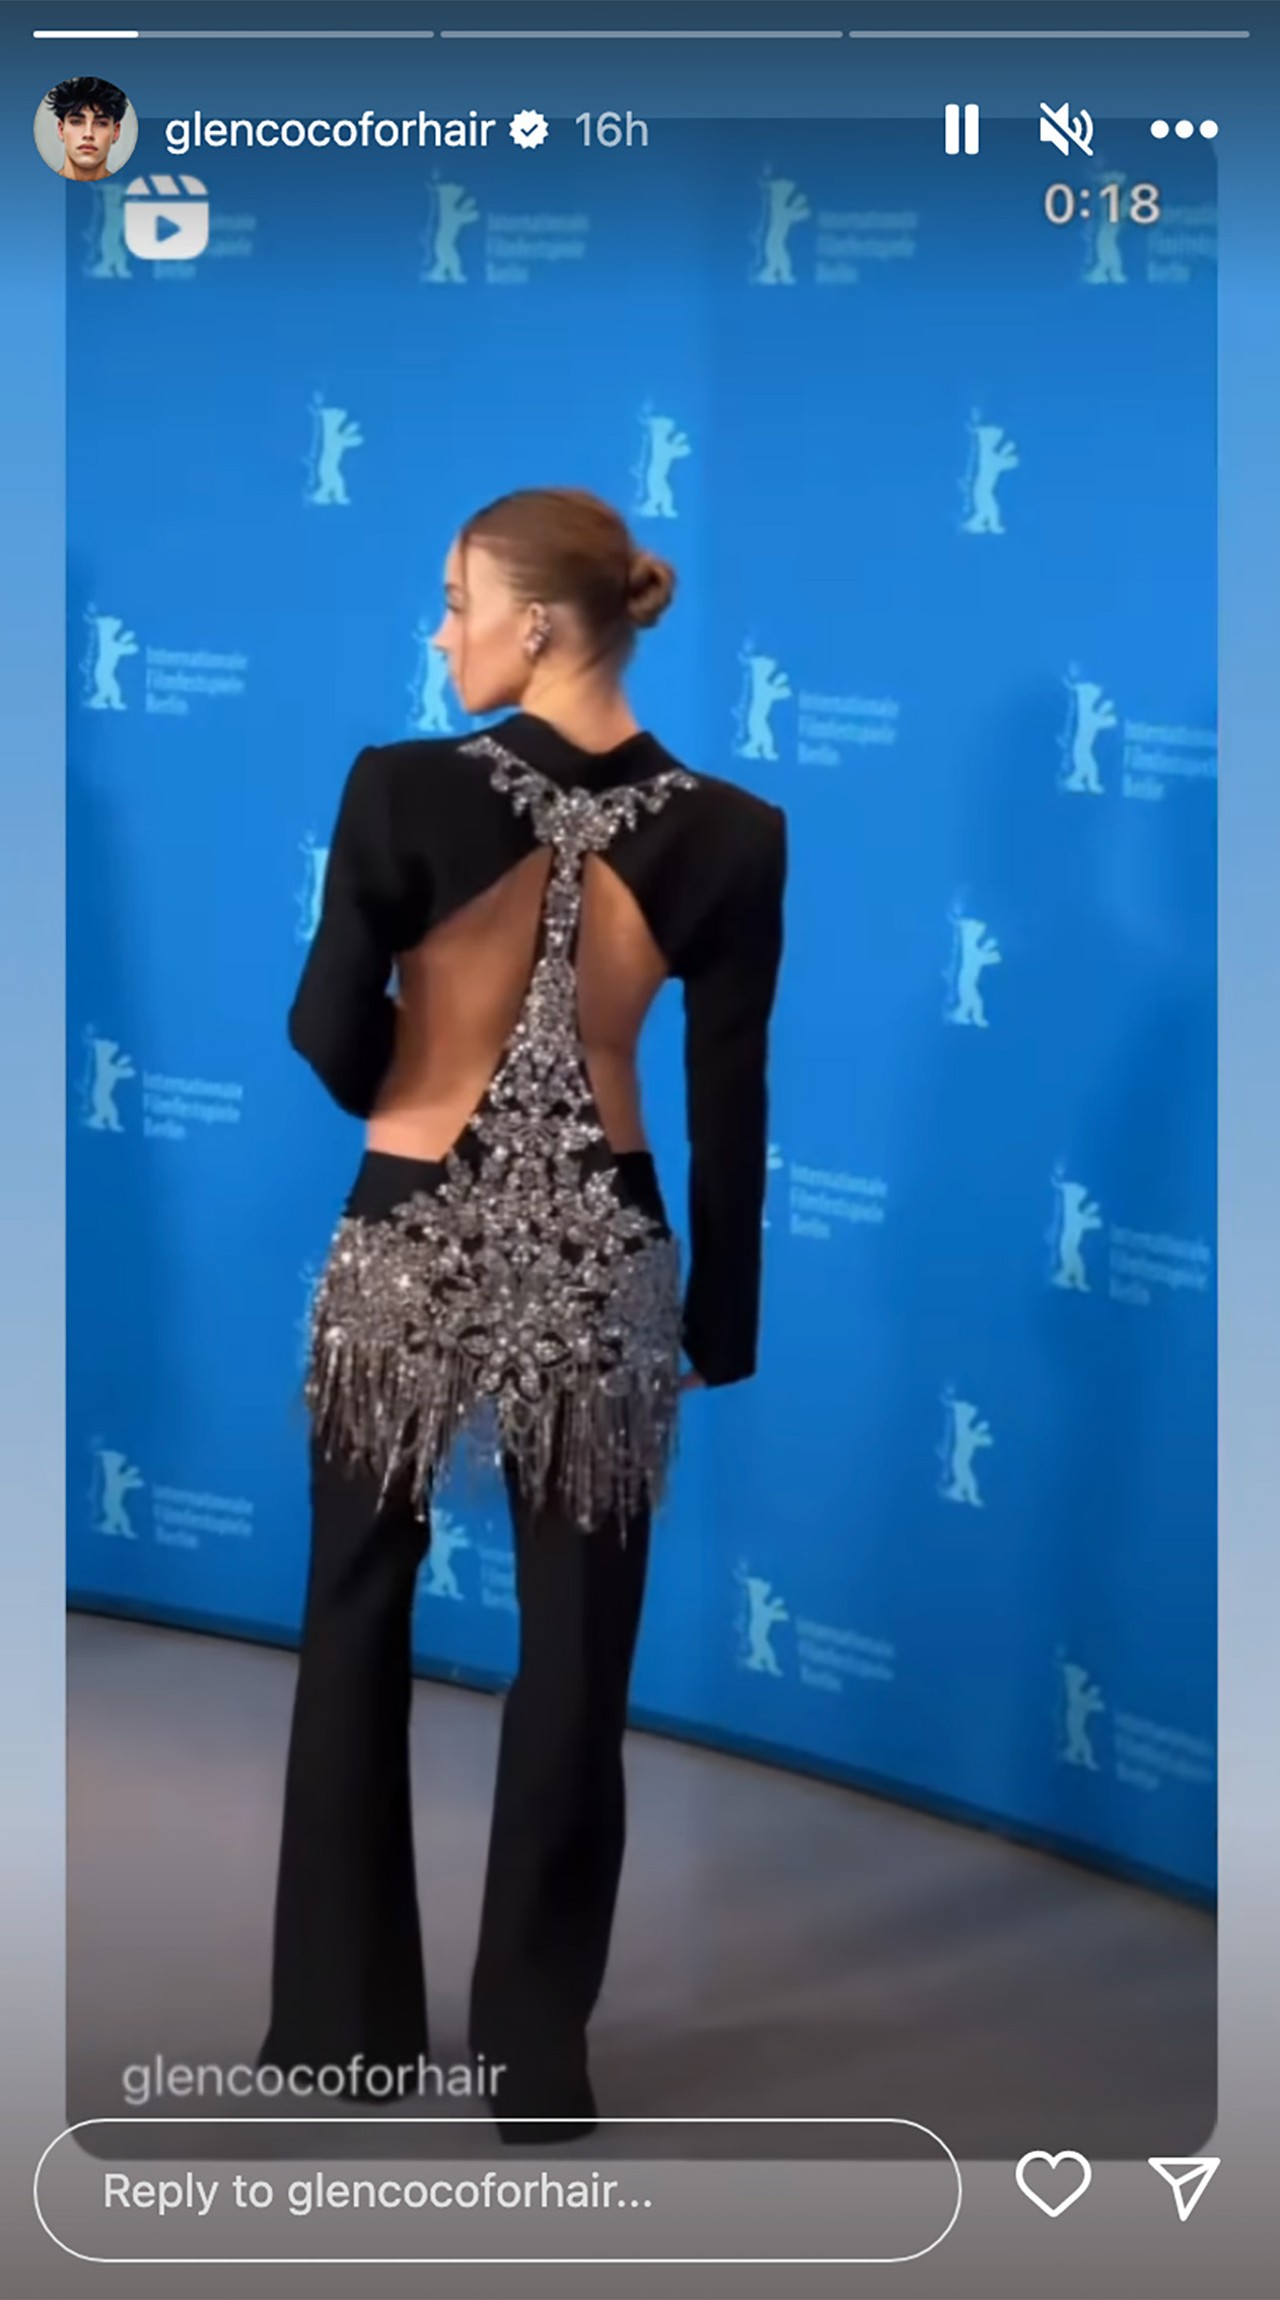 A screenshot from a video on Sydney Sweeney at the Berlin Film Festival, showing the back of her outfit.